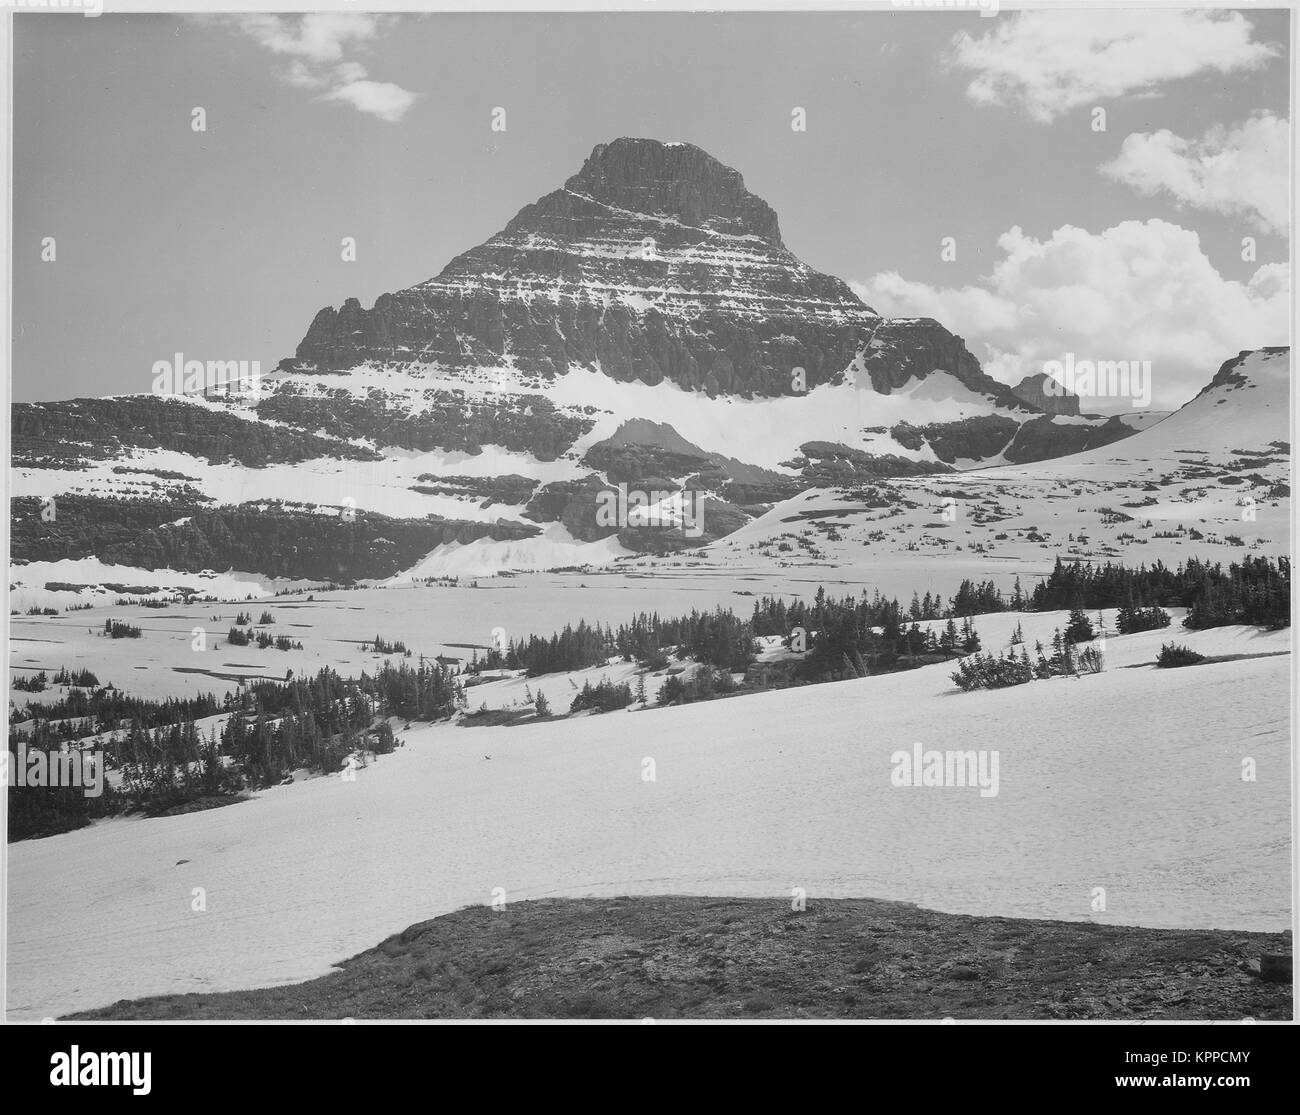 Looking across barren land to mountains 'From Logan Pass Glacier National Park' Montana. 1933 - 1942 Stock Photo